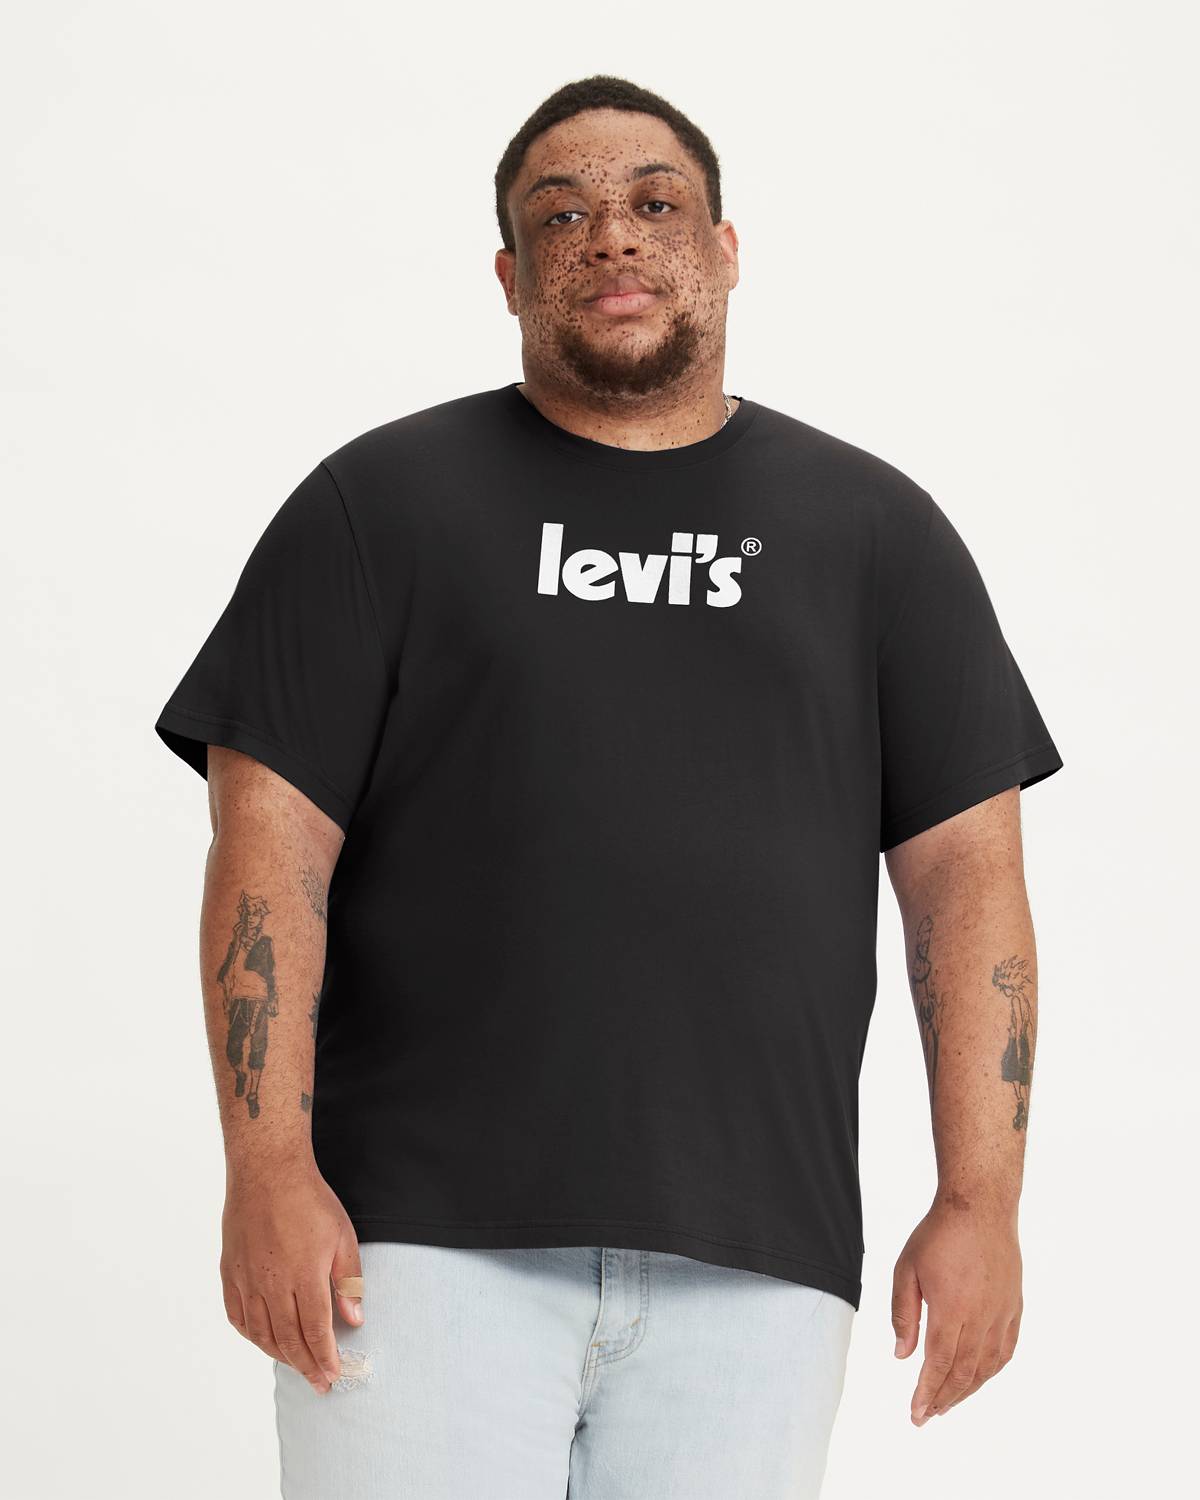 Model wearing black tee with white Levi's logo on the chest.